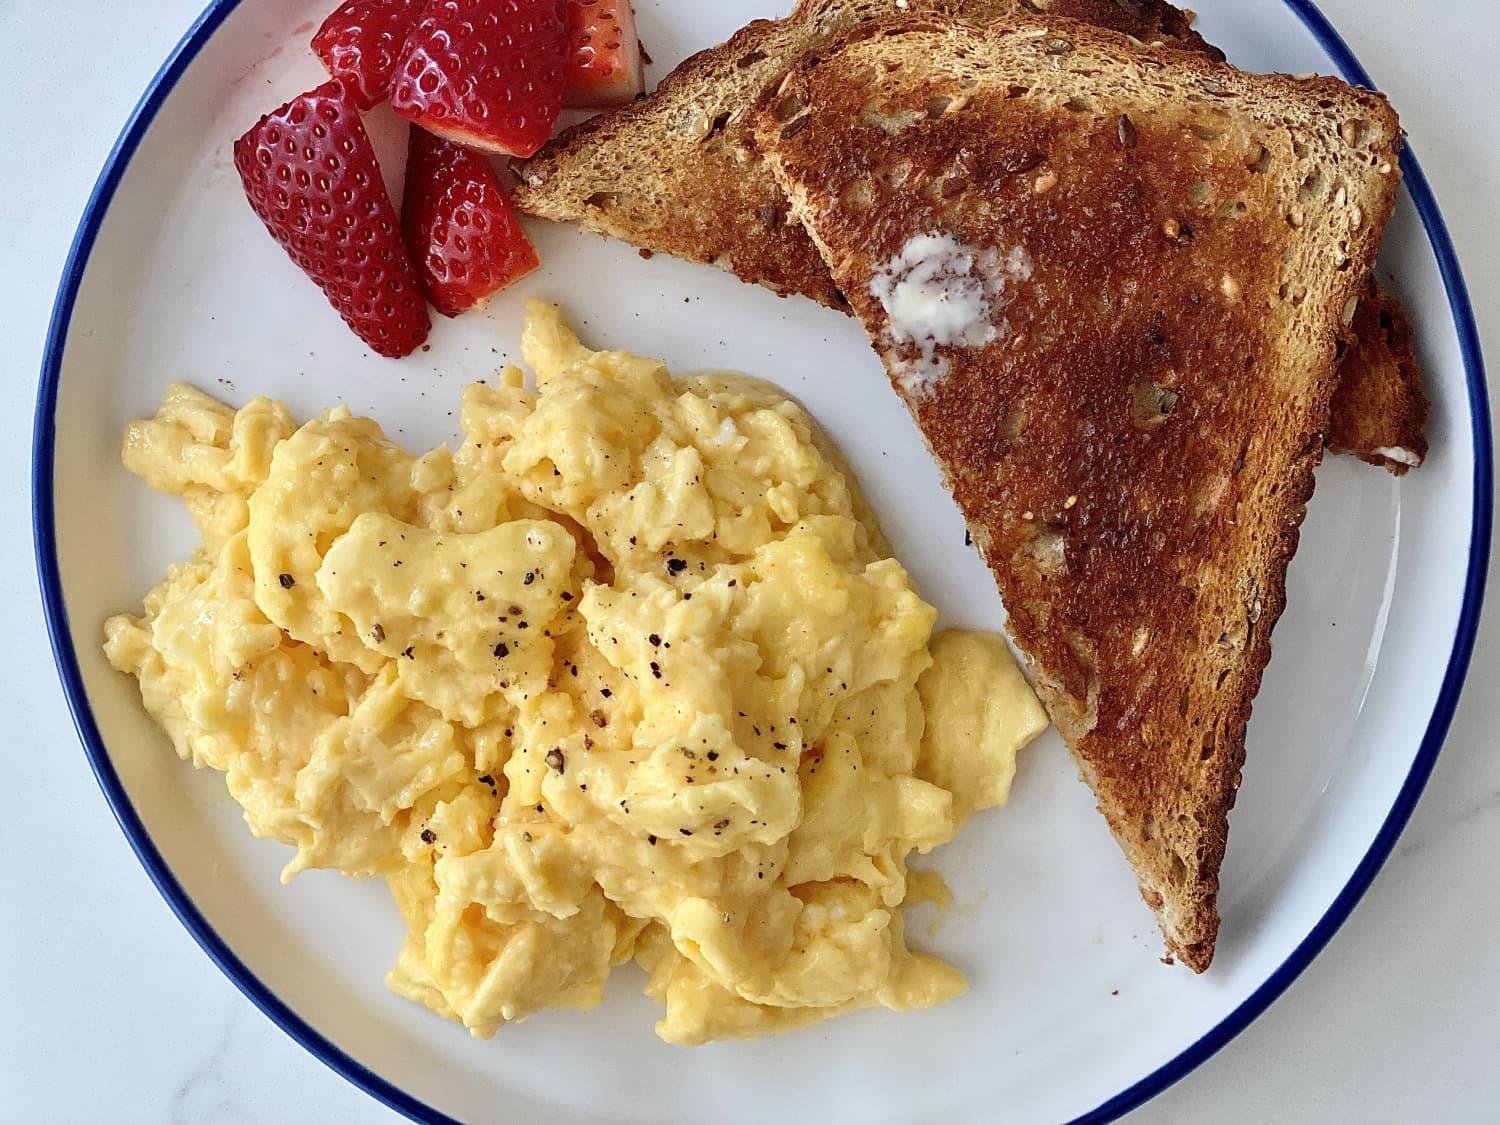 Julia Child Taught Me the Secret to the Fluffiest Scrambled Eggs and My Mornings Will Never Be the Same